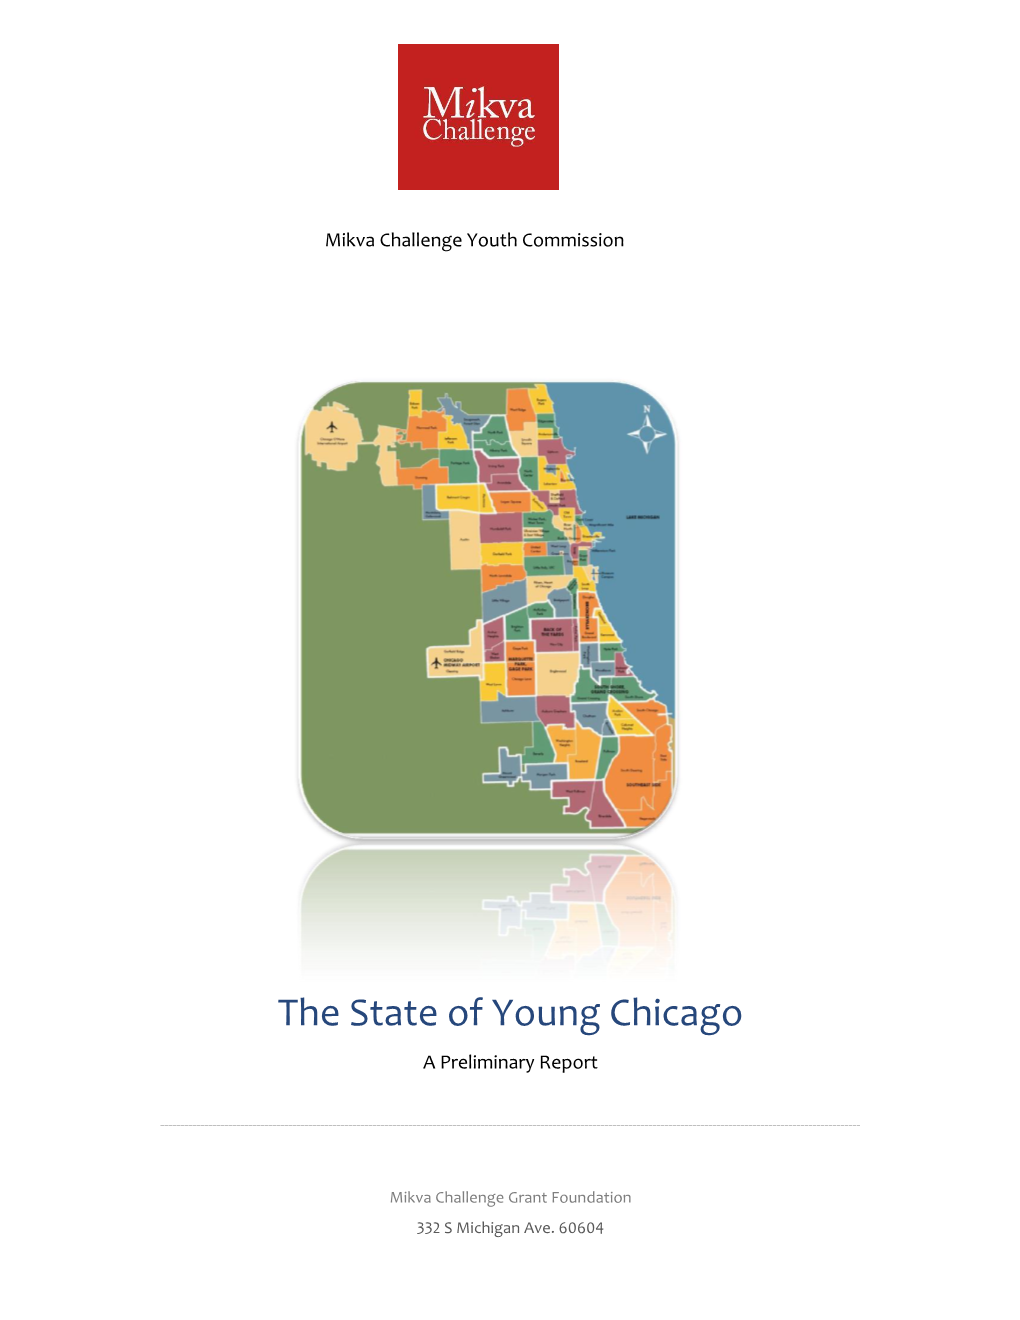 The State of Young Chicago a Preliminary Report